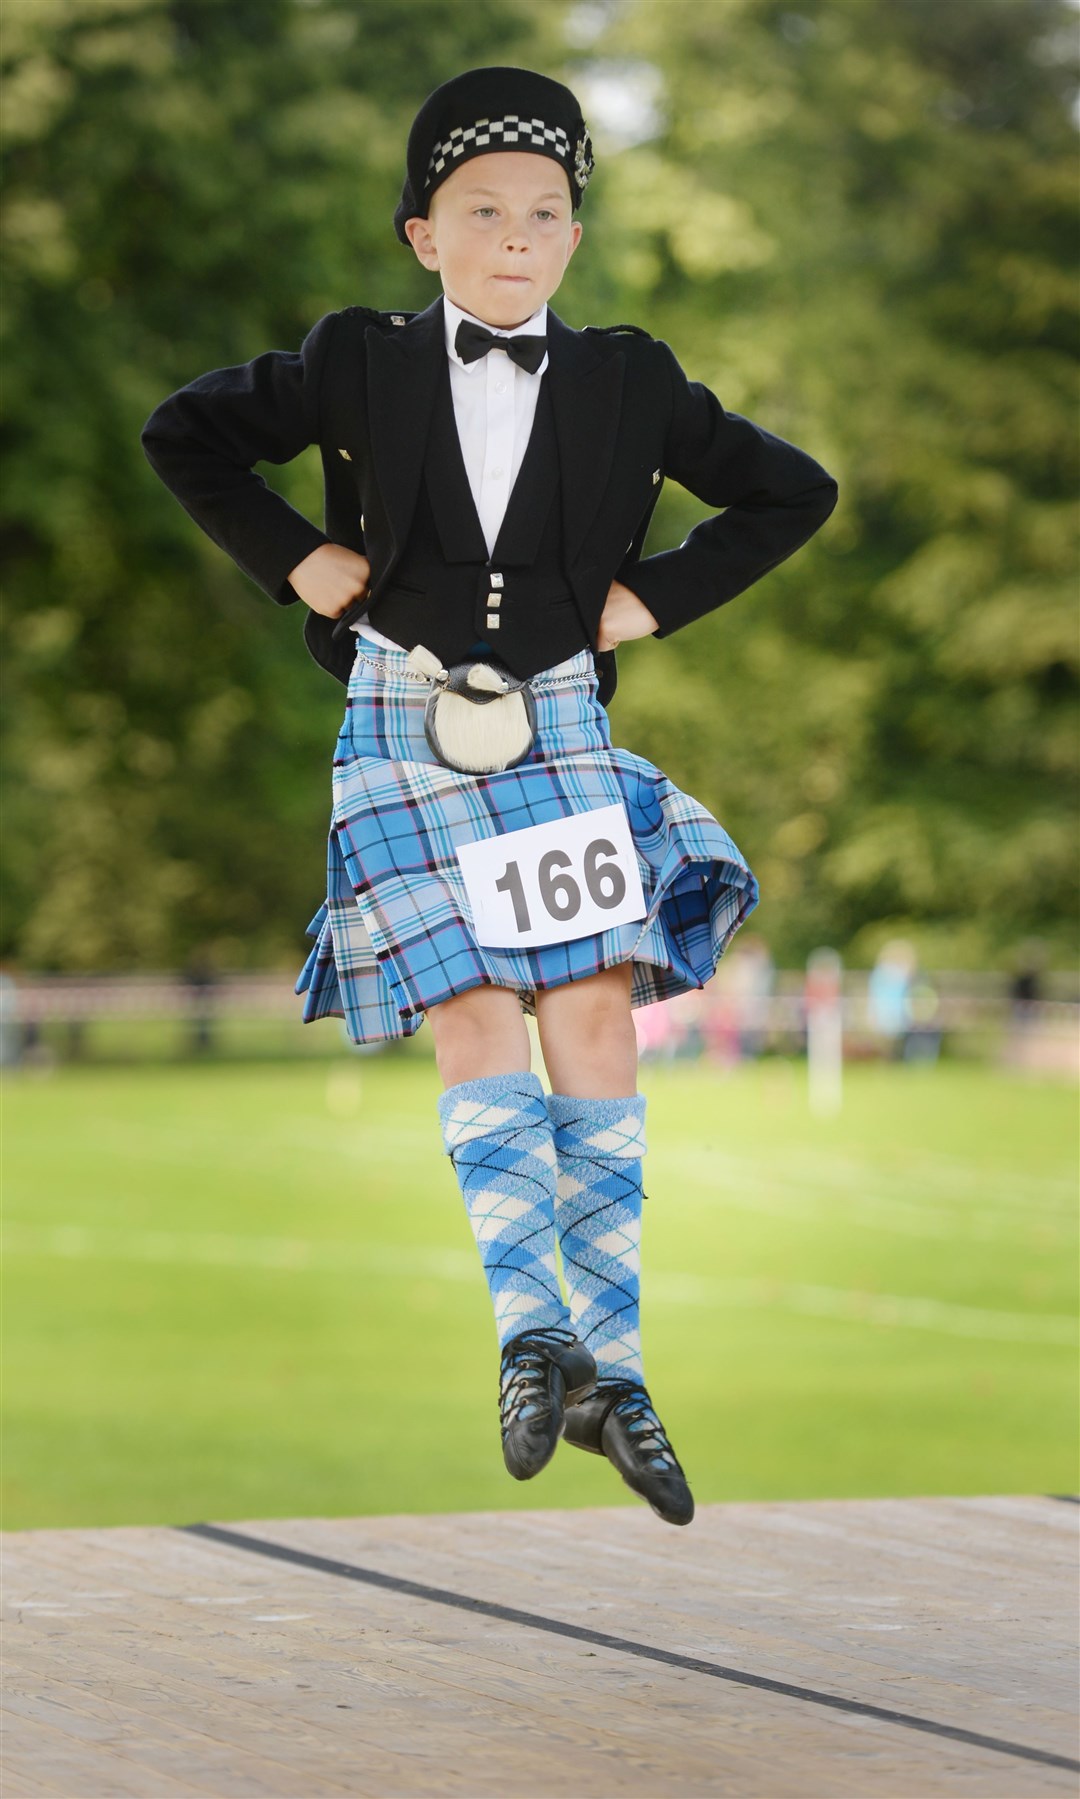 BETTER DAYS: Dance competitor Innes Mackenzie of Fearn going through a routine at a previous Strathpeffer Highland Gathering. Picture: Gair Fraser